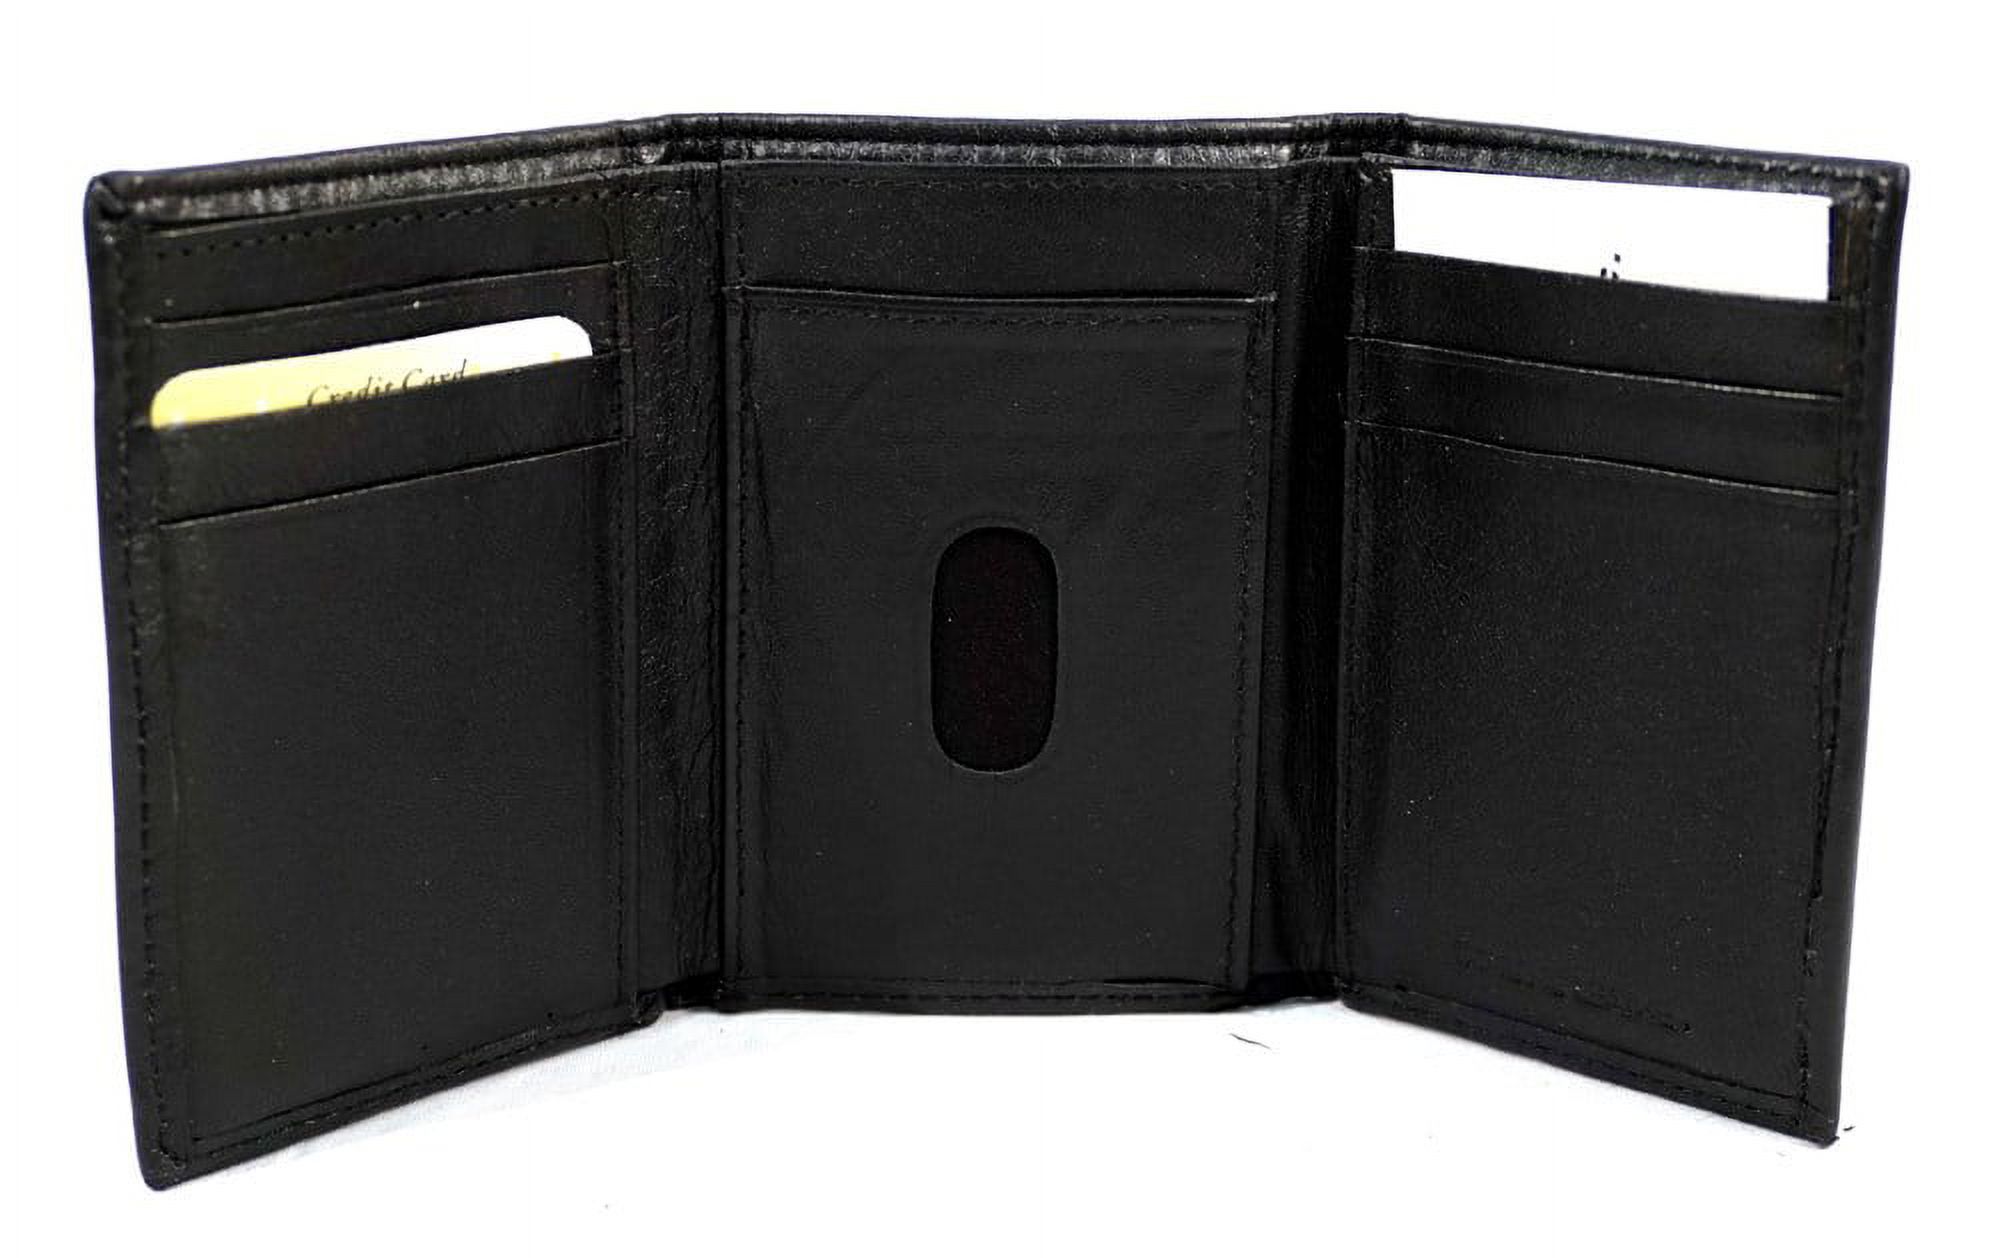 NCAA - Men's Colorado Buffaloes Embroidered Trifold Wallet - image 2 of 3